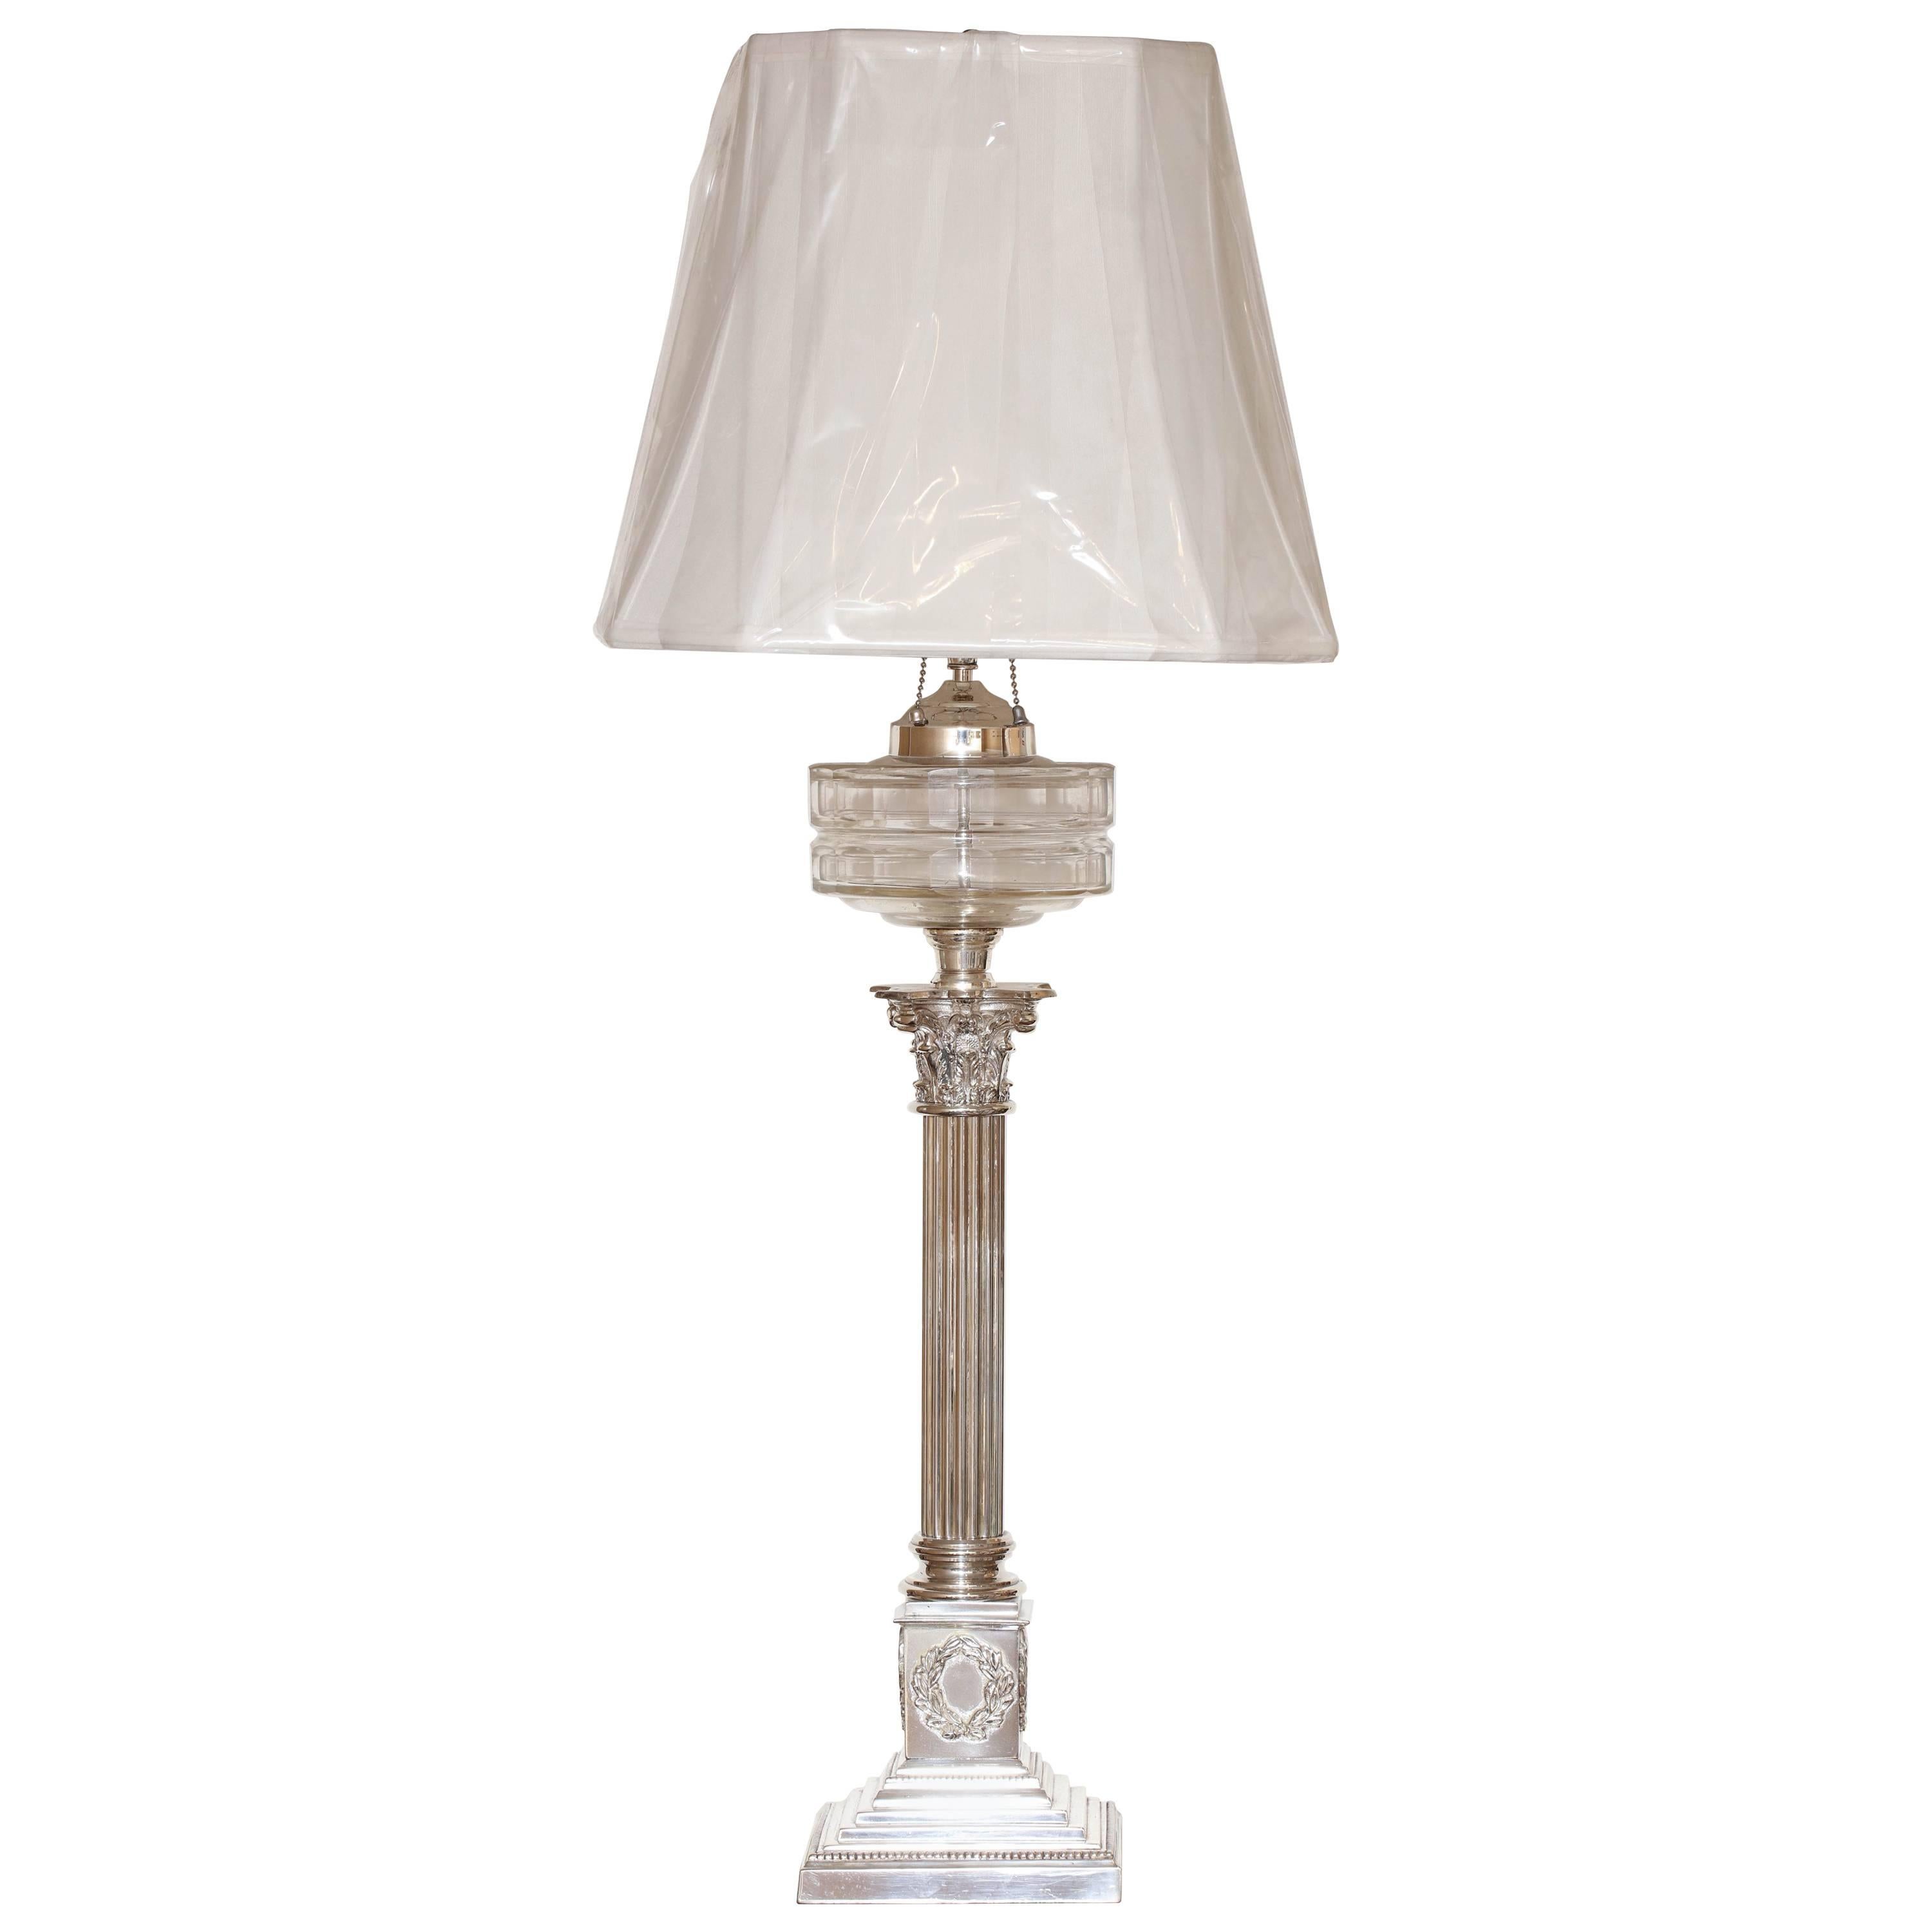 Tall Neoclassical Electrified Silver Plated Column-Form Oil Lamp For Sale